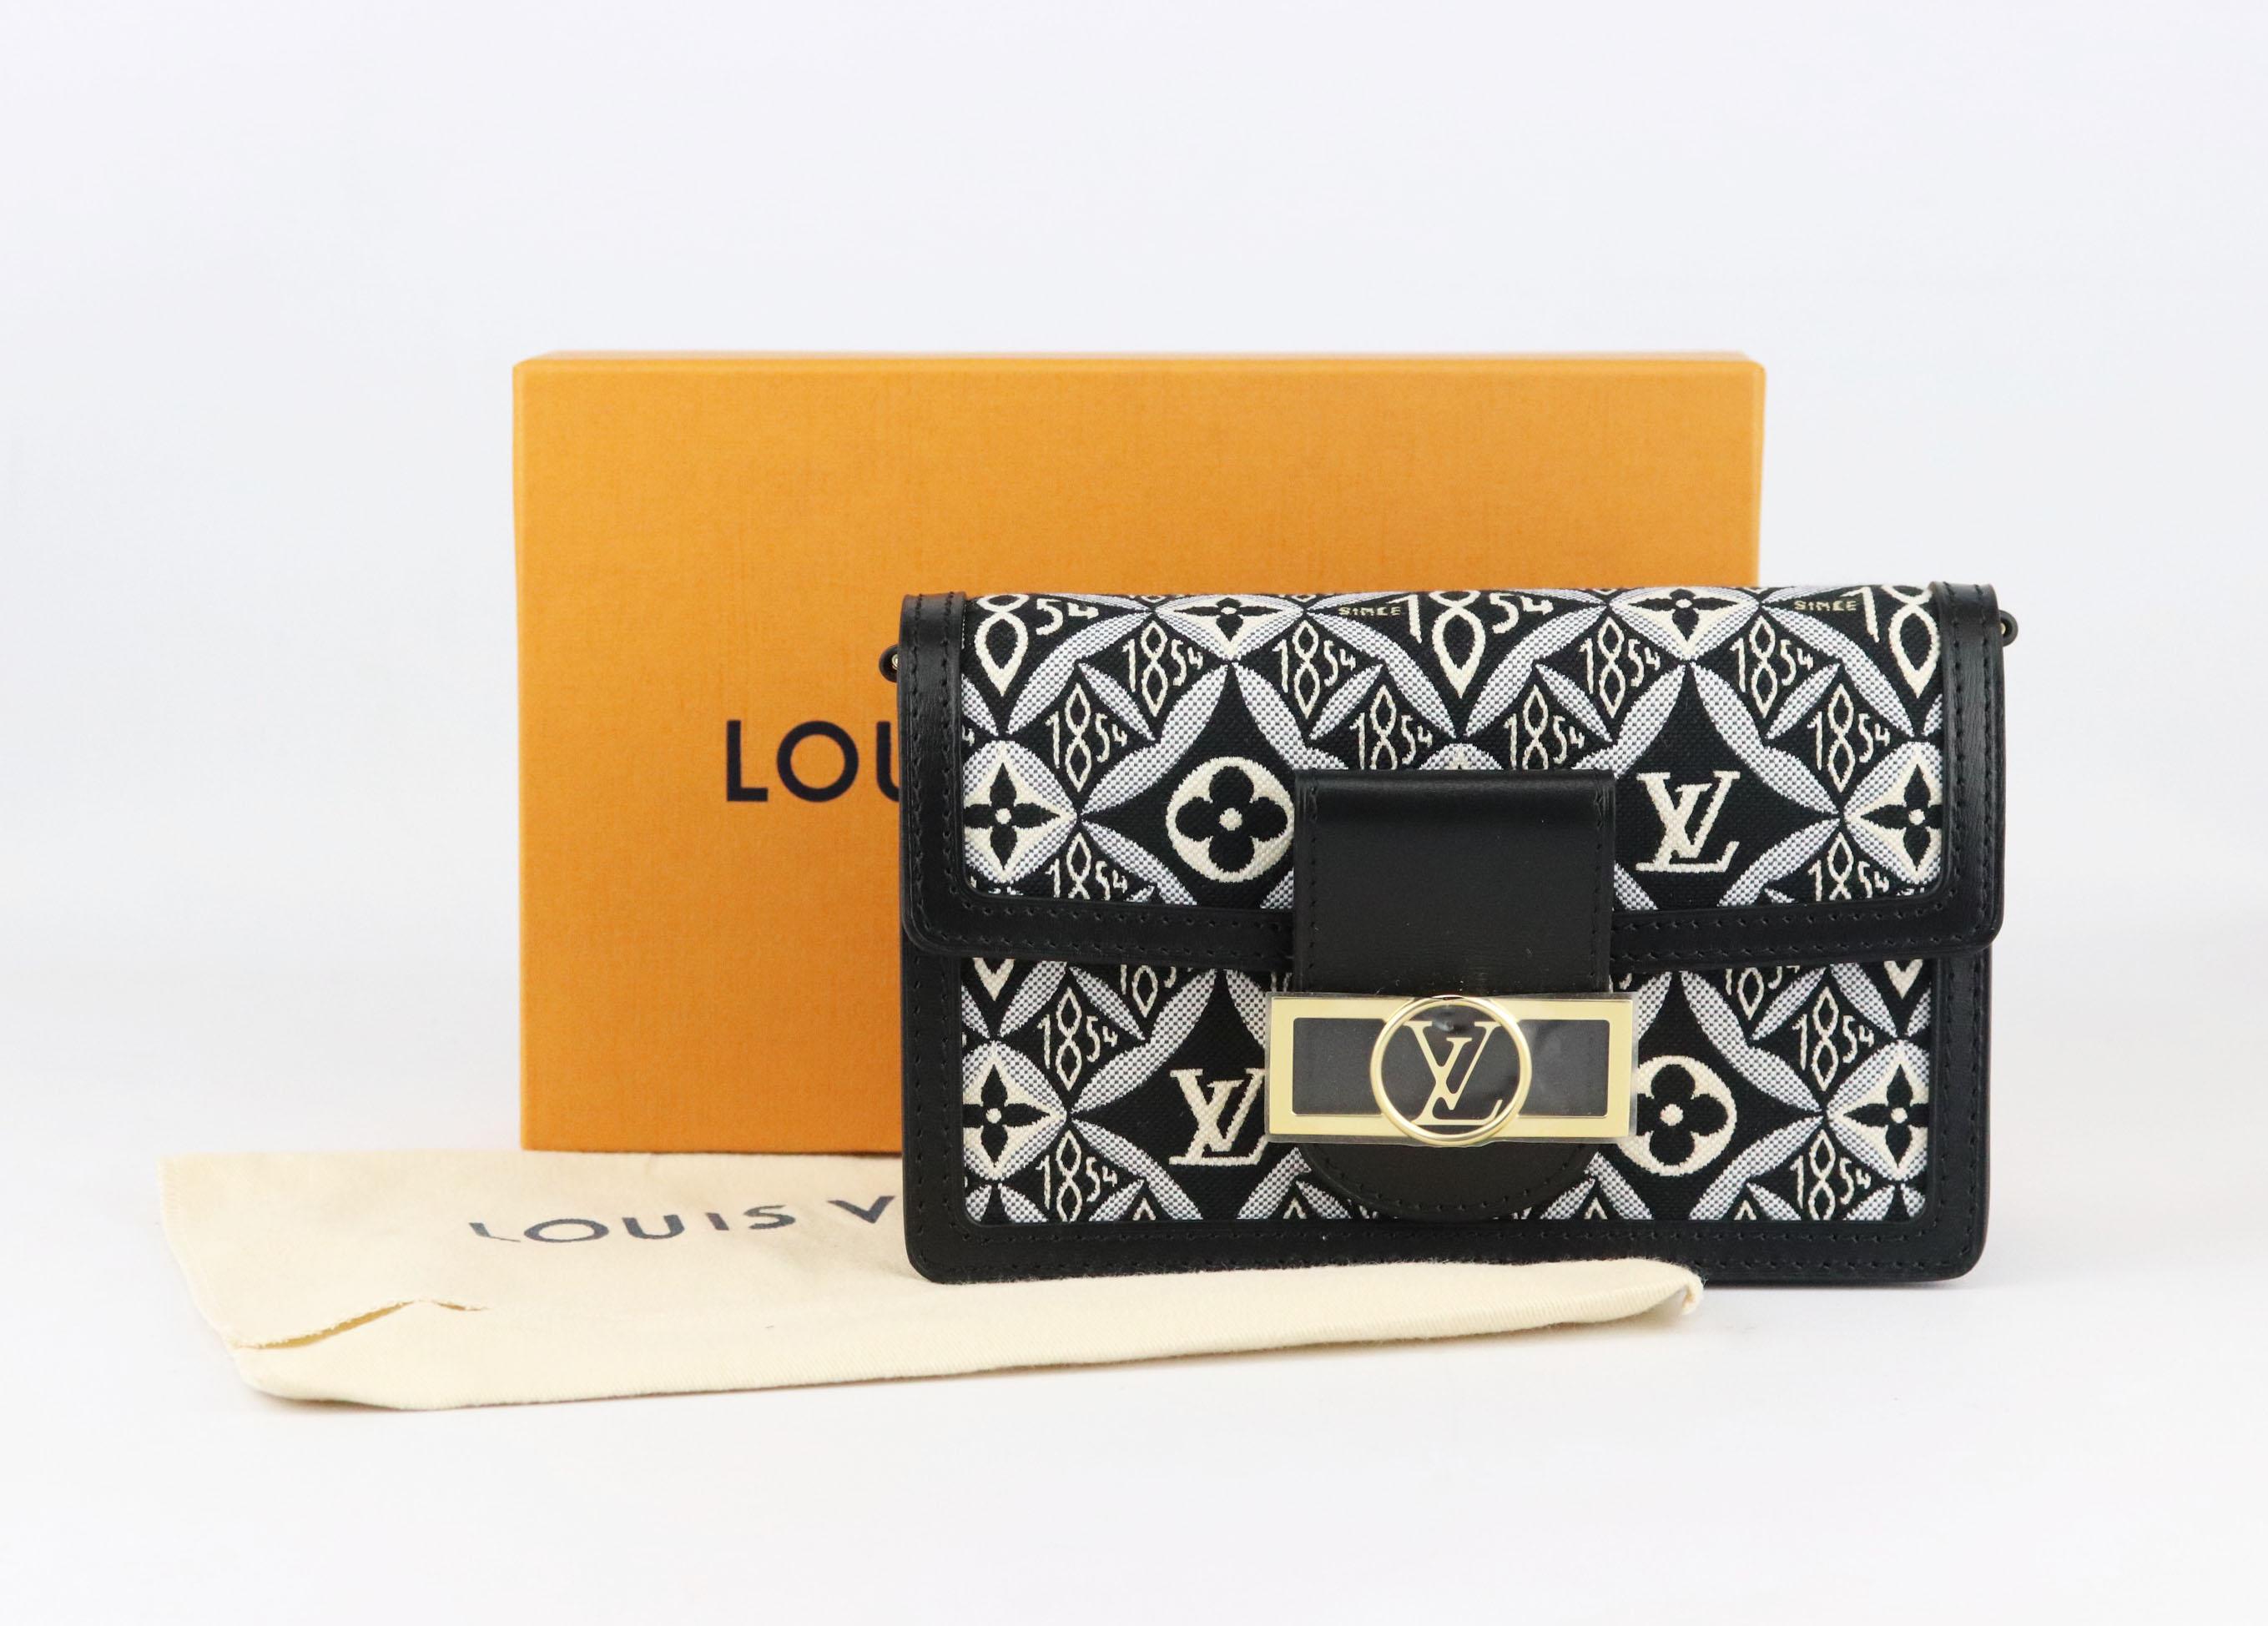 Louis Vuitton Dauphine bag has the brand's signature Since 1854 canvas textile fabric on a wallet on chain with a slim detachable gold-tone chain, so you can carry it as a shoulder bag, made in Italy from black smooth leather trim, it's finished